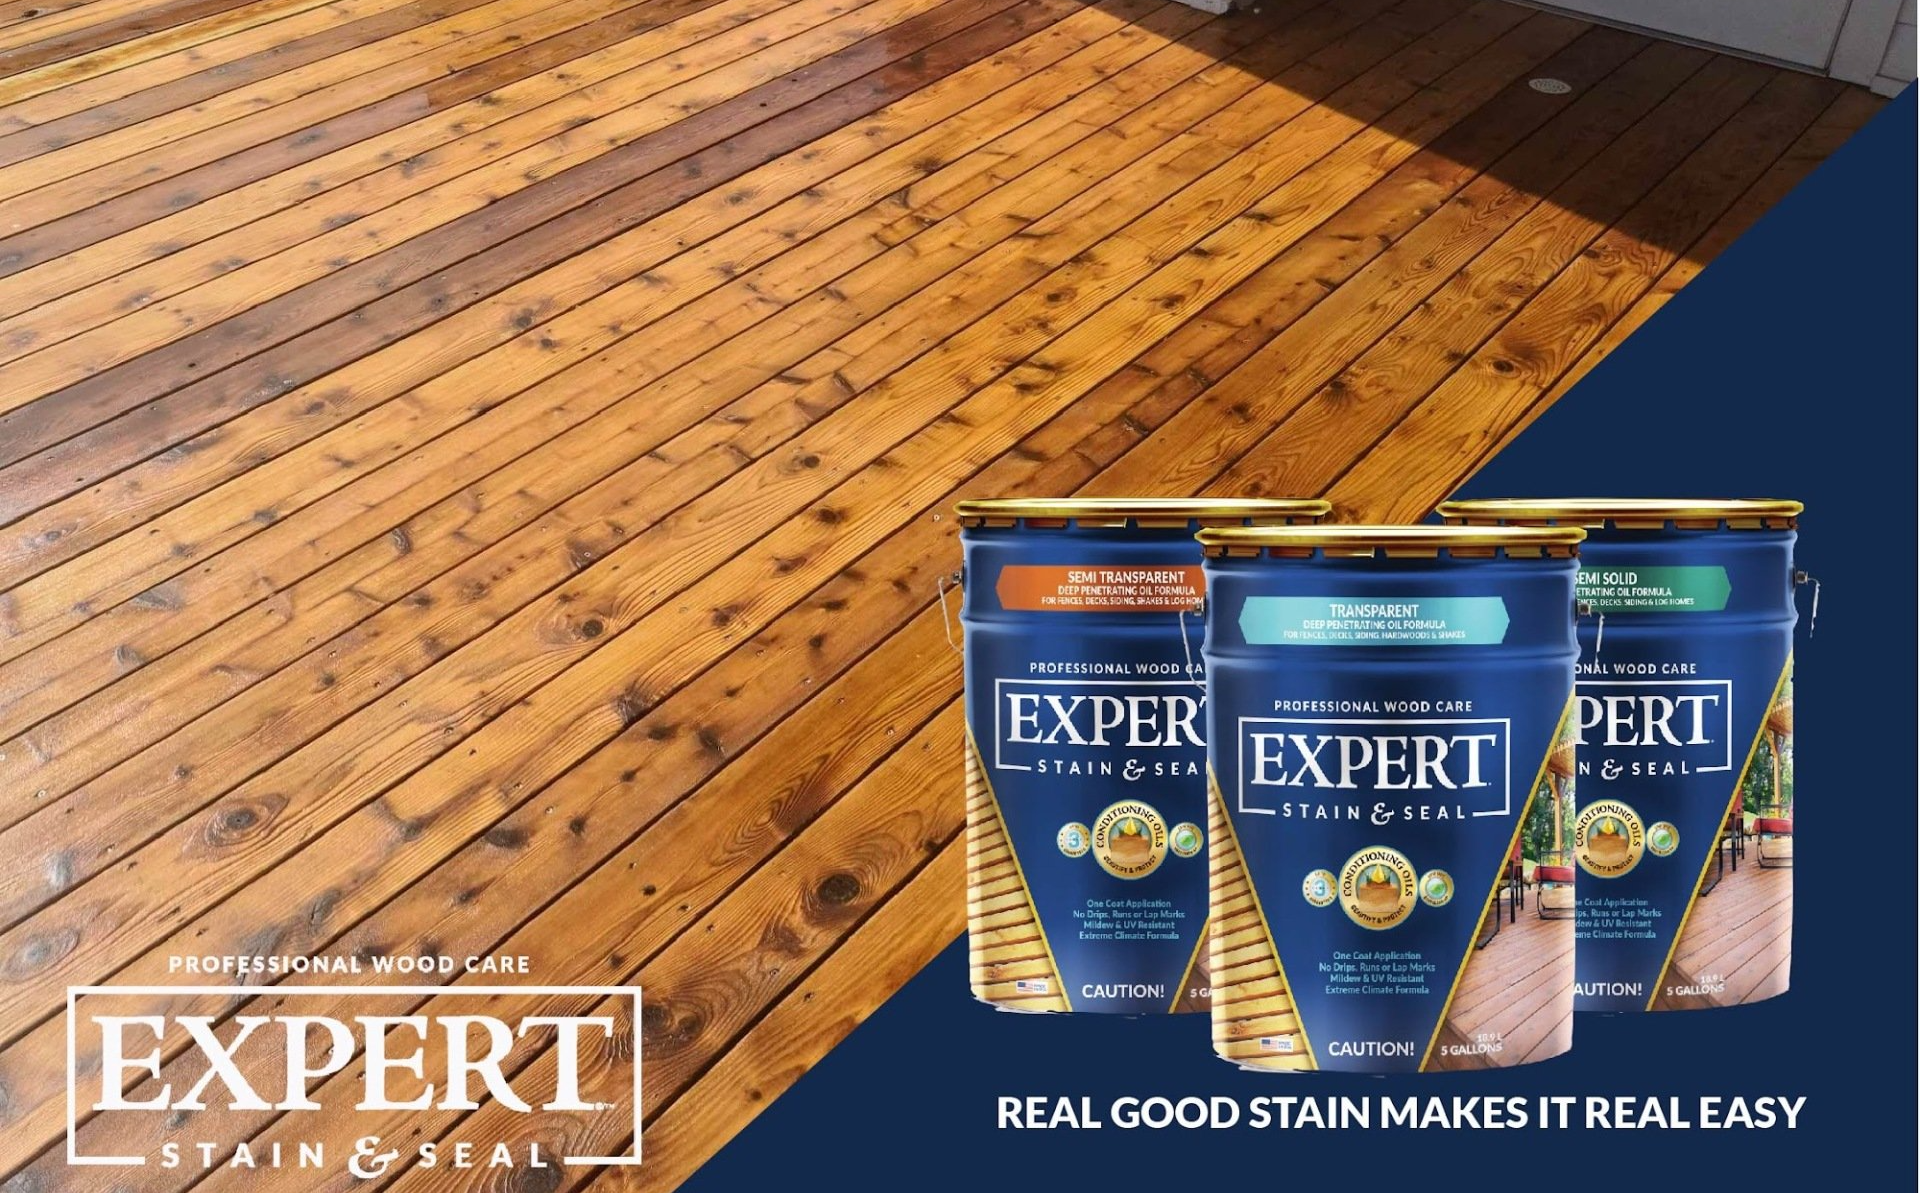 Deck stained and sealed using EXPERT Stain & Seal